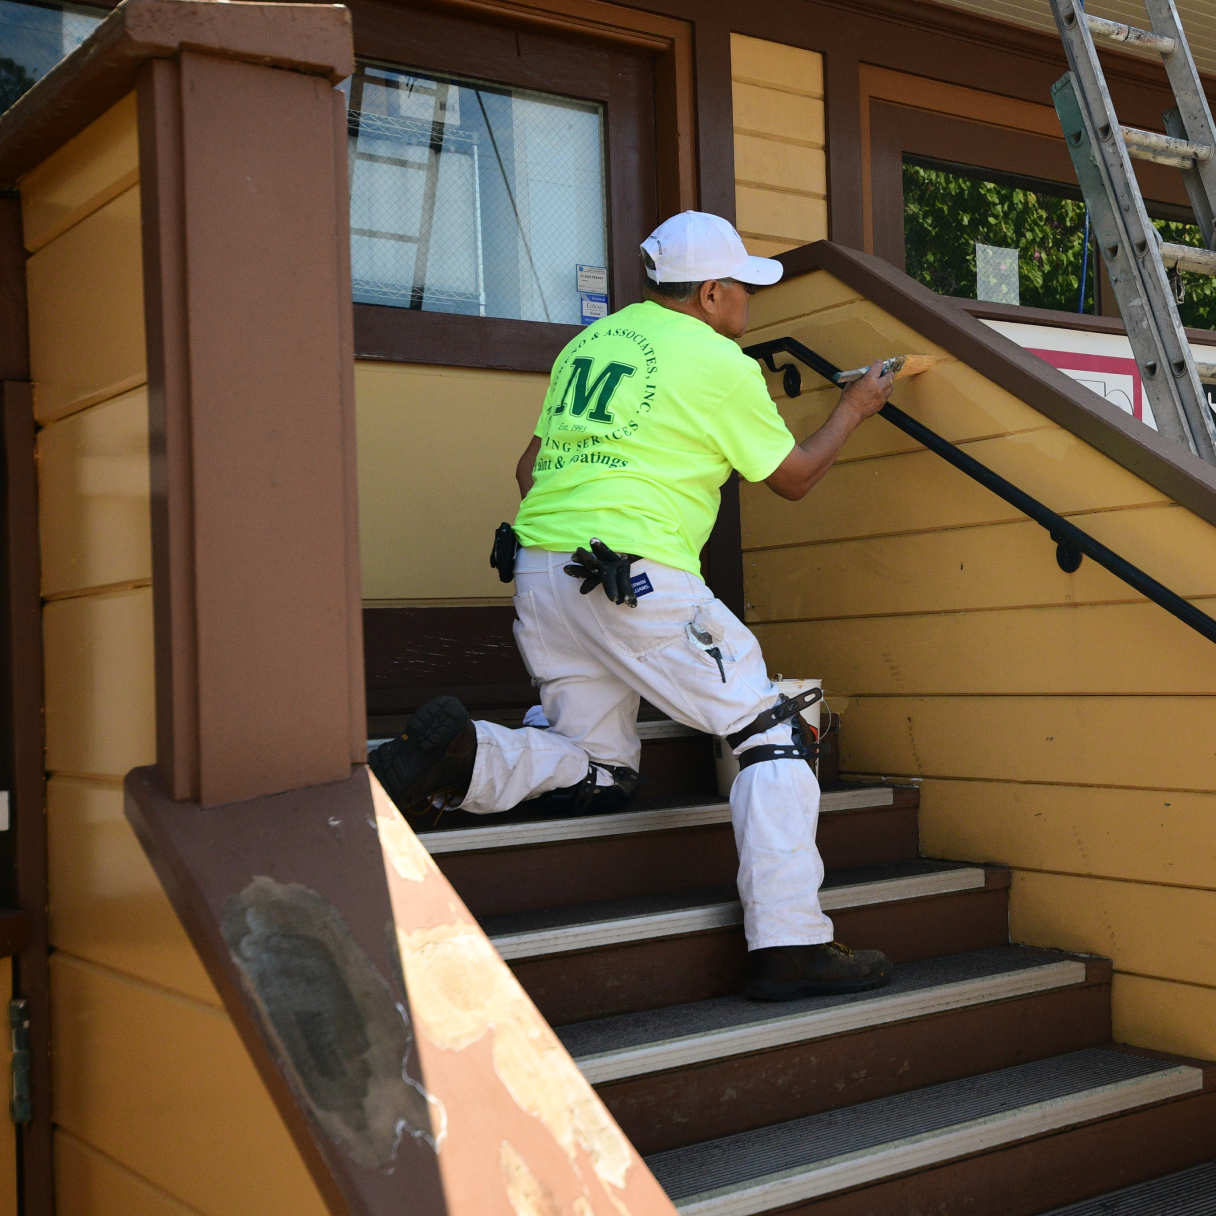 Man in neon yellow shirt and white pants wearing a white hat painting the exterior of a building standing on a flight of stairs.